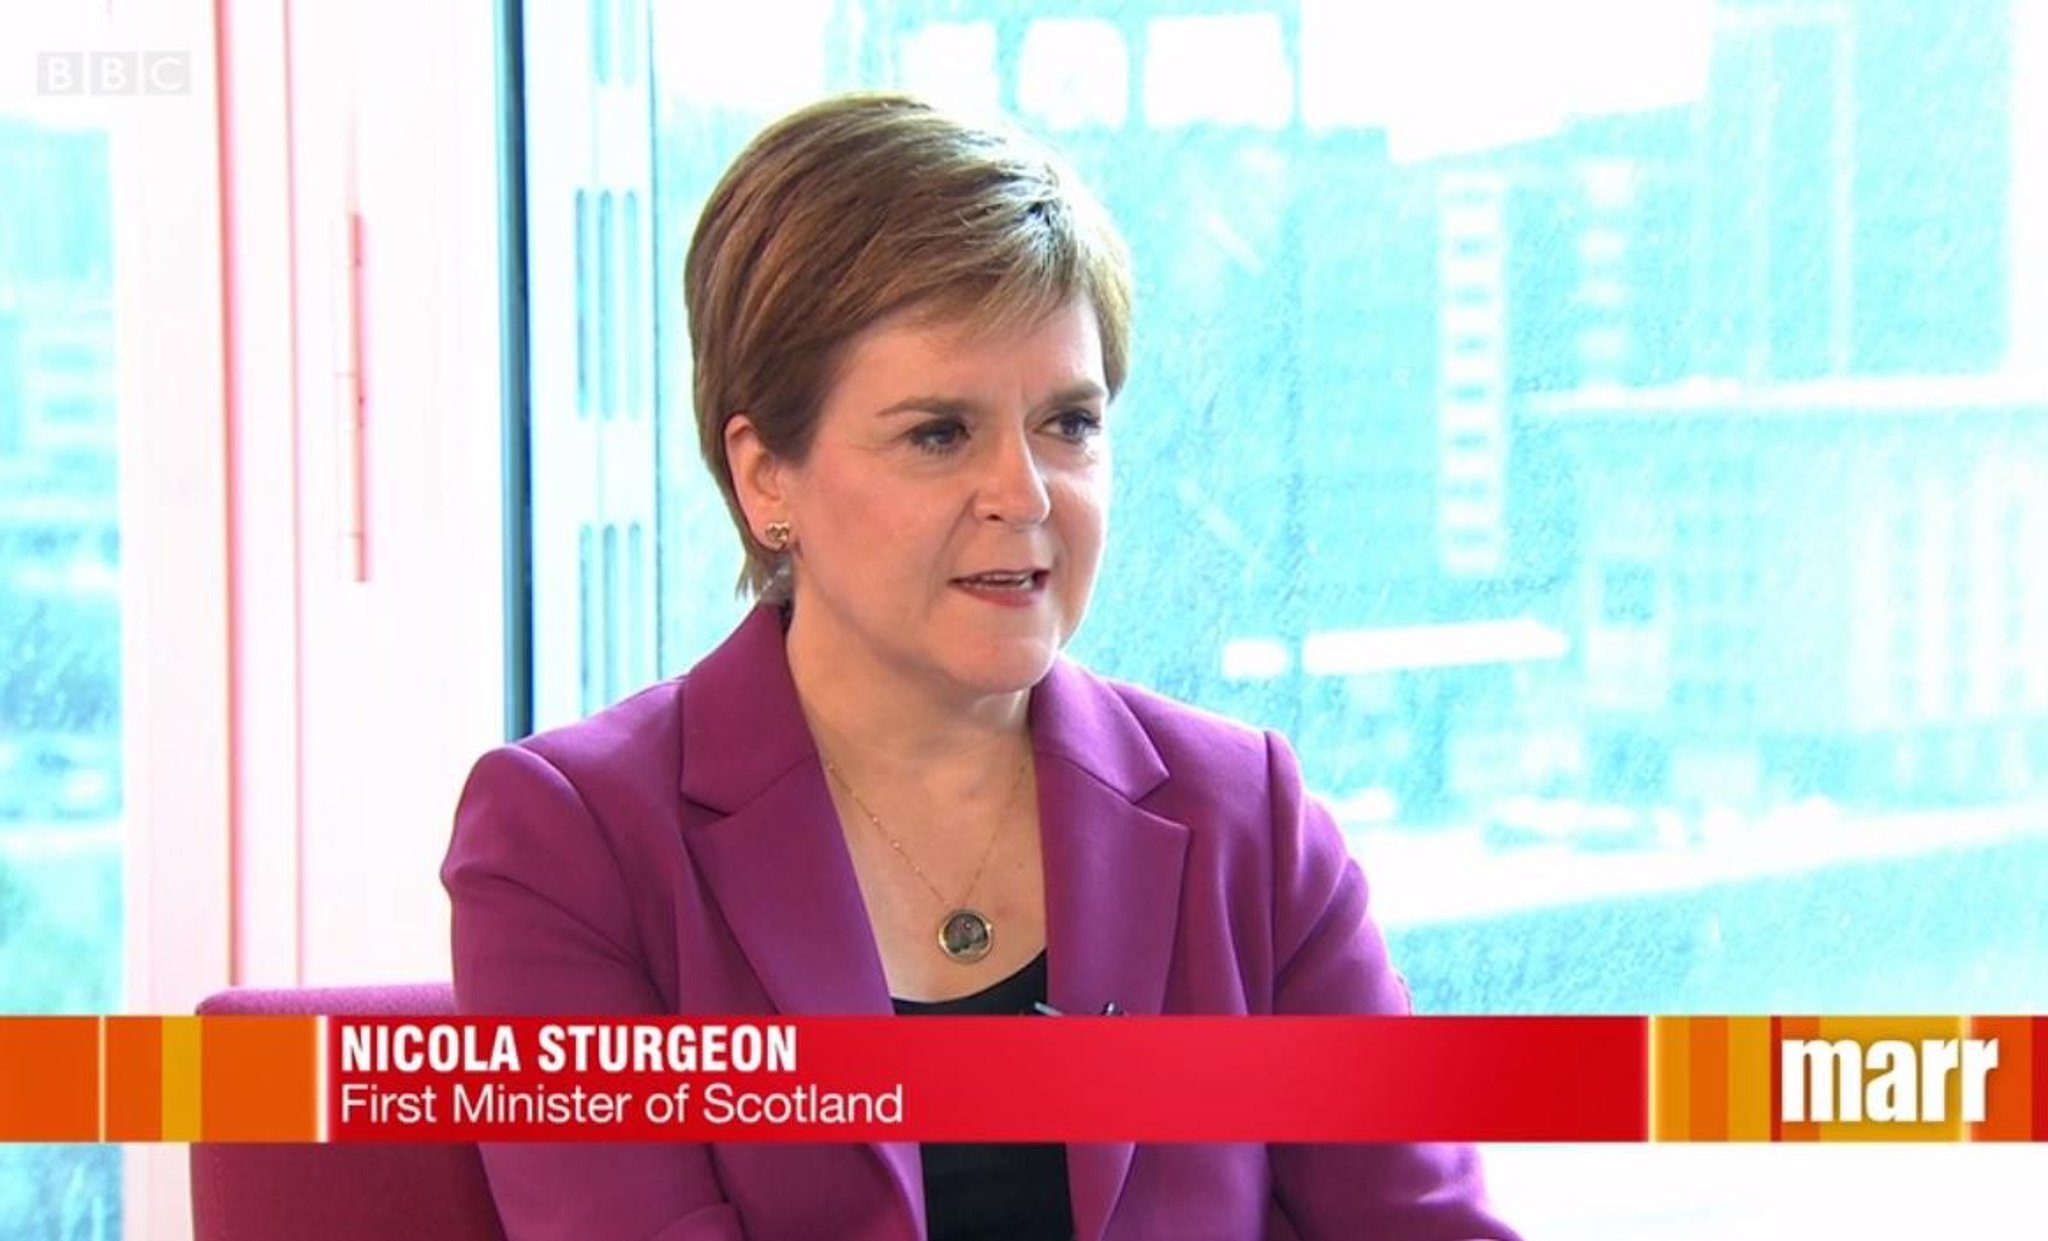 Nicola Sturgeon says it would be 'completely outrageous' for UK to block indyref after election landslide